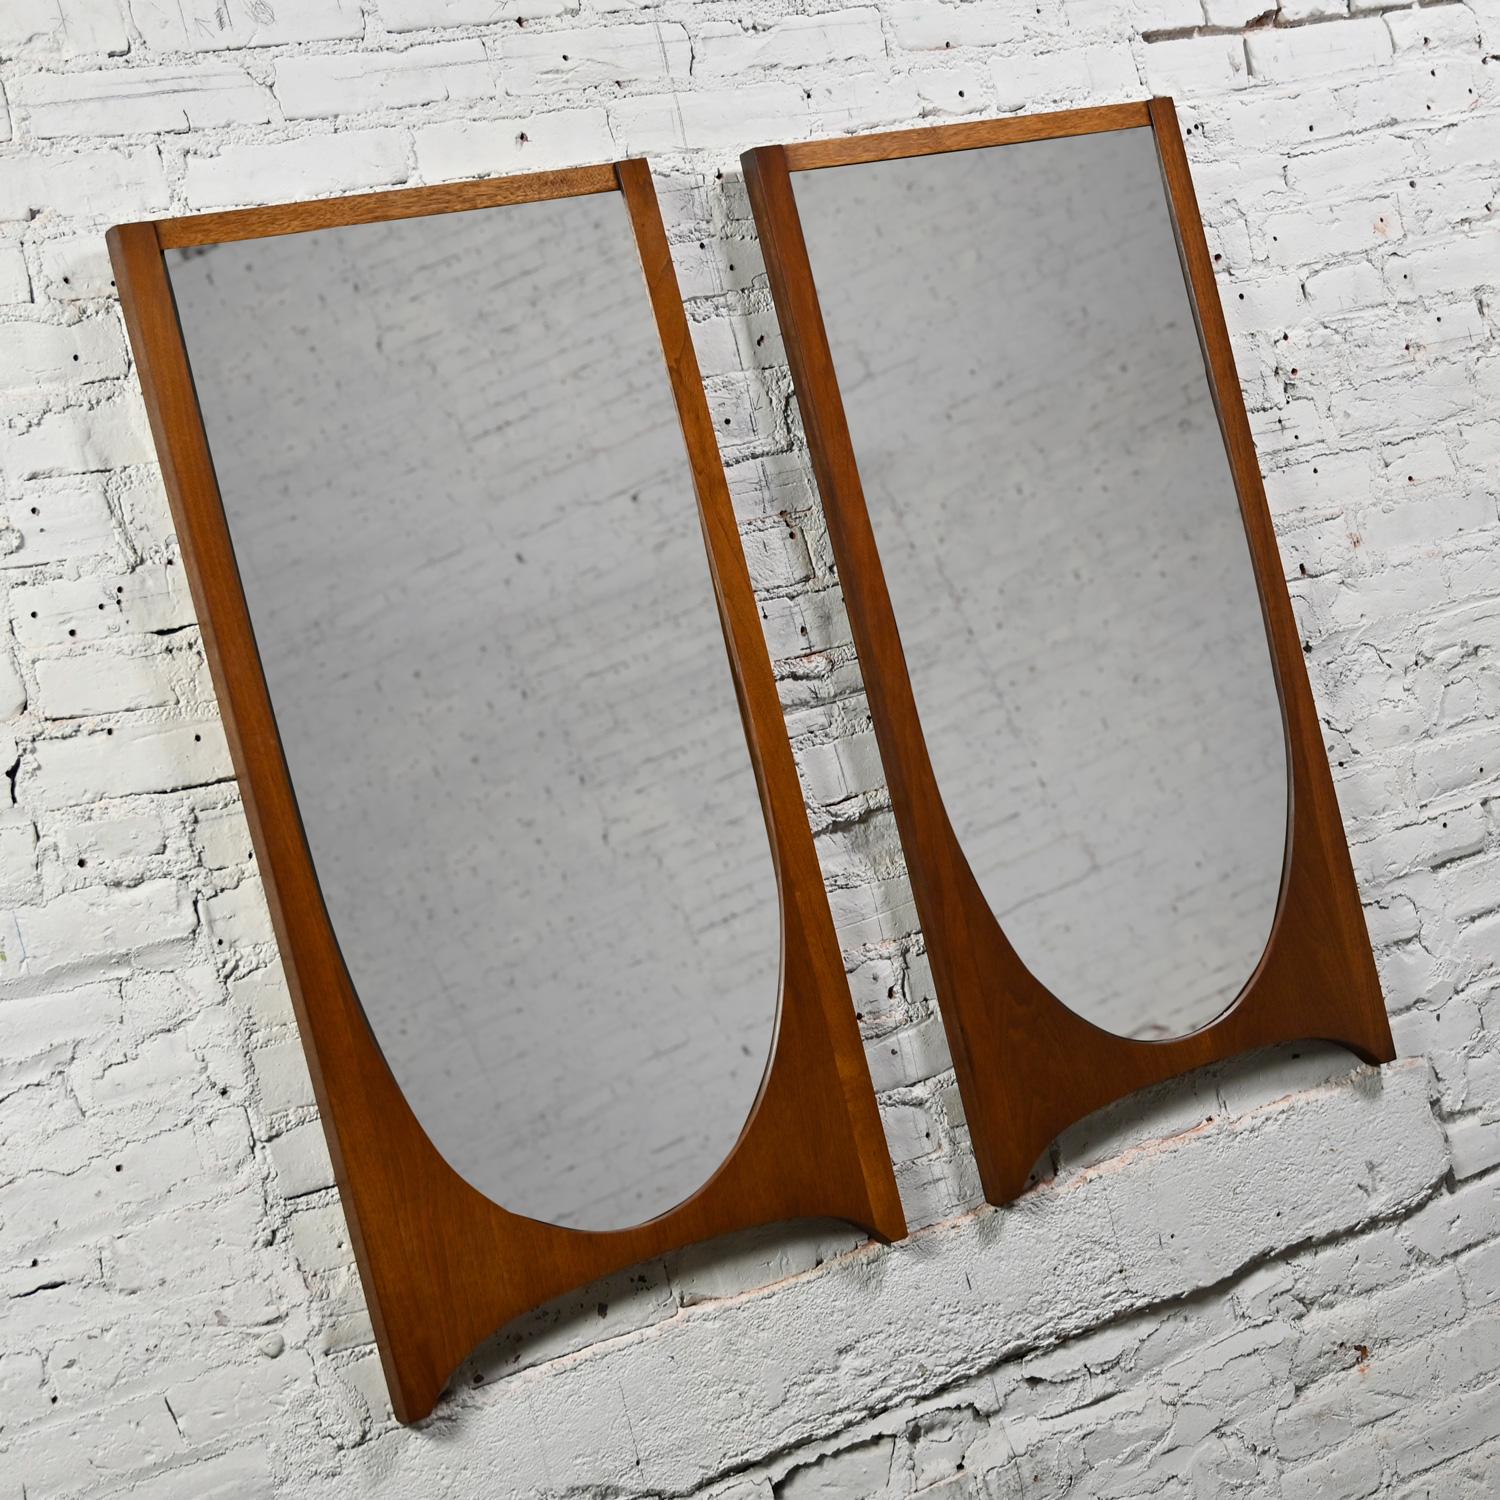 Stunning Mid-Century Modern Brutalist Brasilia single arch mirrors #6130-01 Broyhill Premier Series comprised of walnut, a pair. Beautiful condition, keeping in mind that these are vintage and not new so will have signs of use and wear. This piece